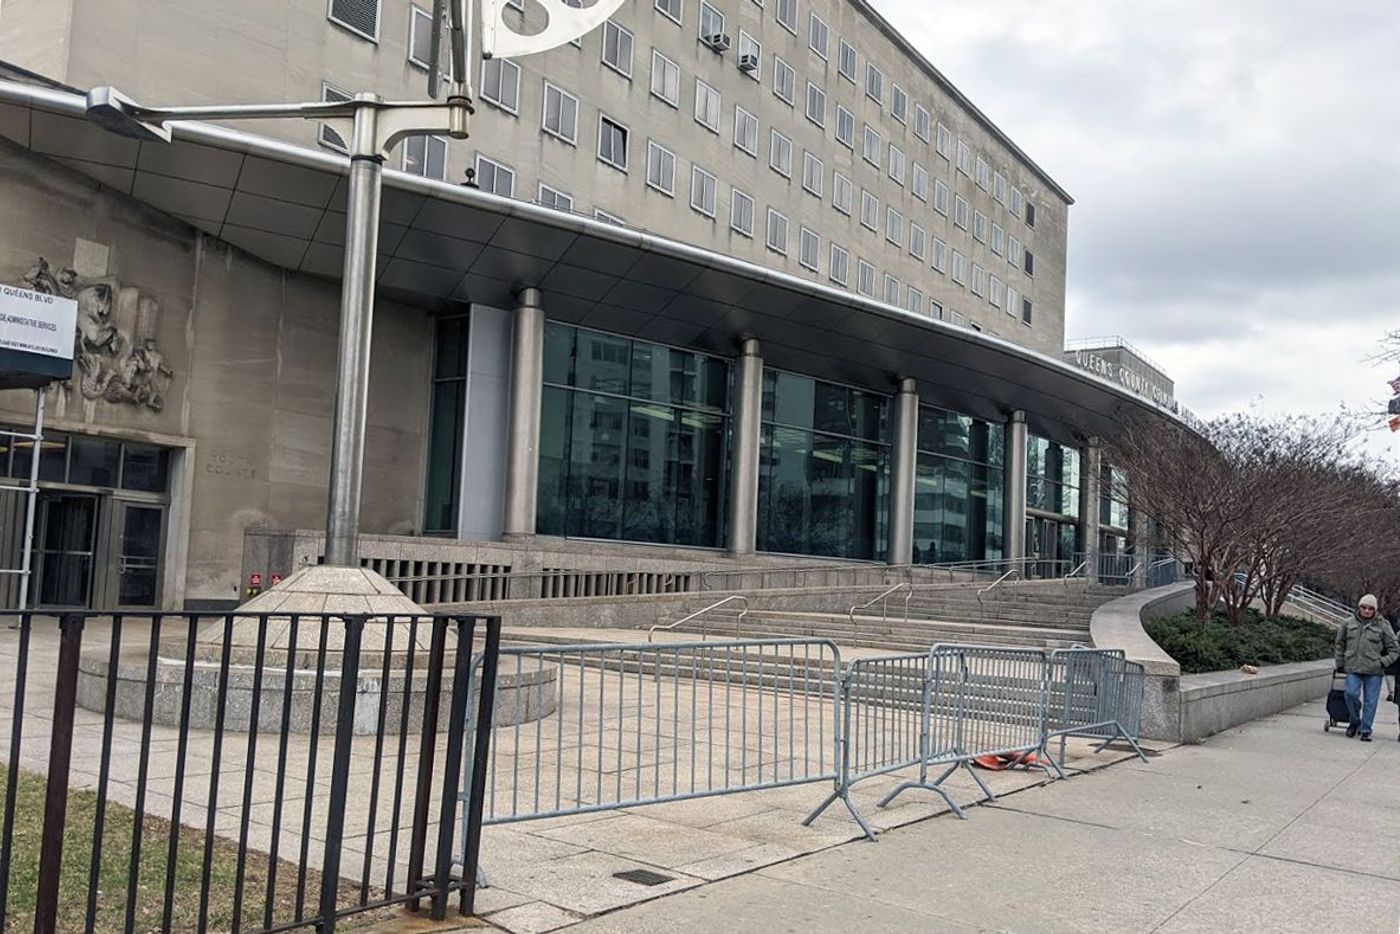 A metal barricade blocked an accessible entrance to Queens County Criminal Court.